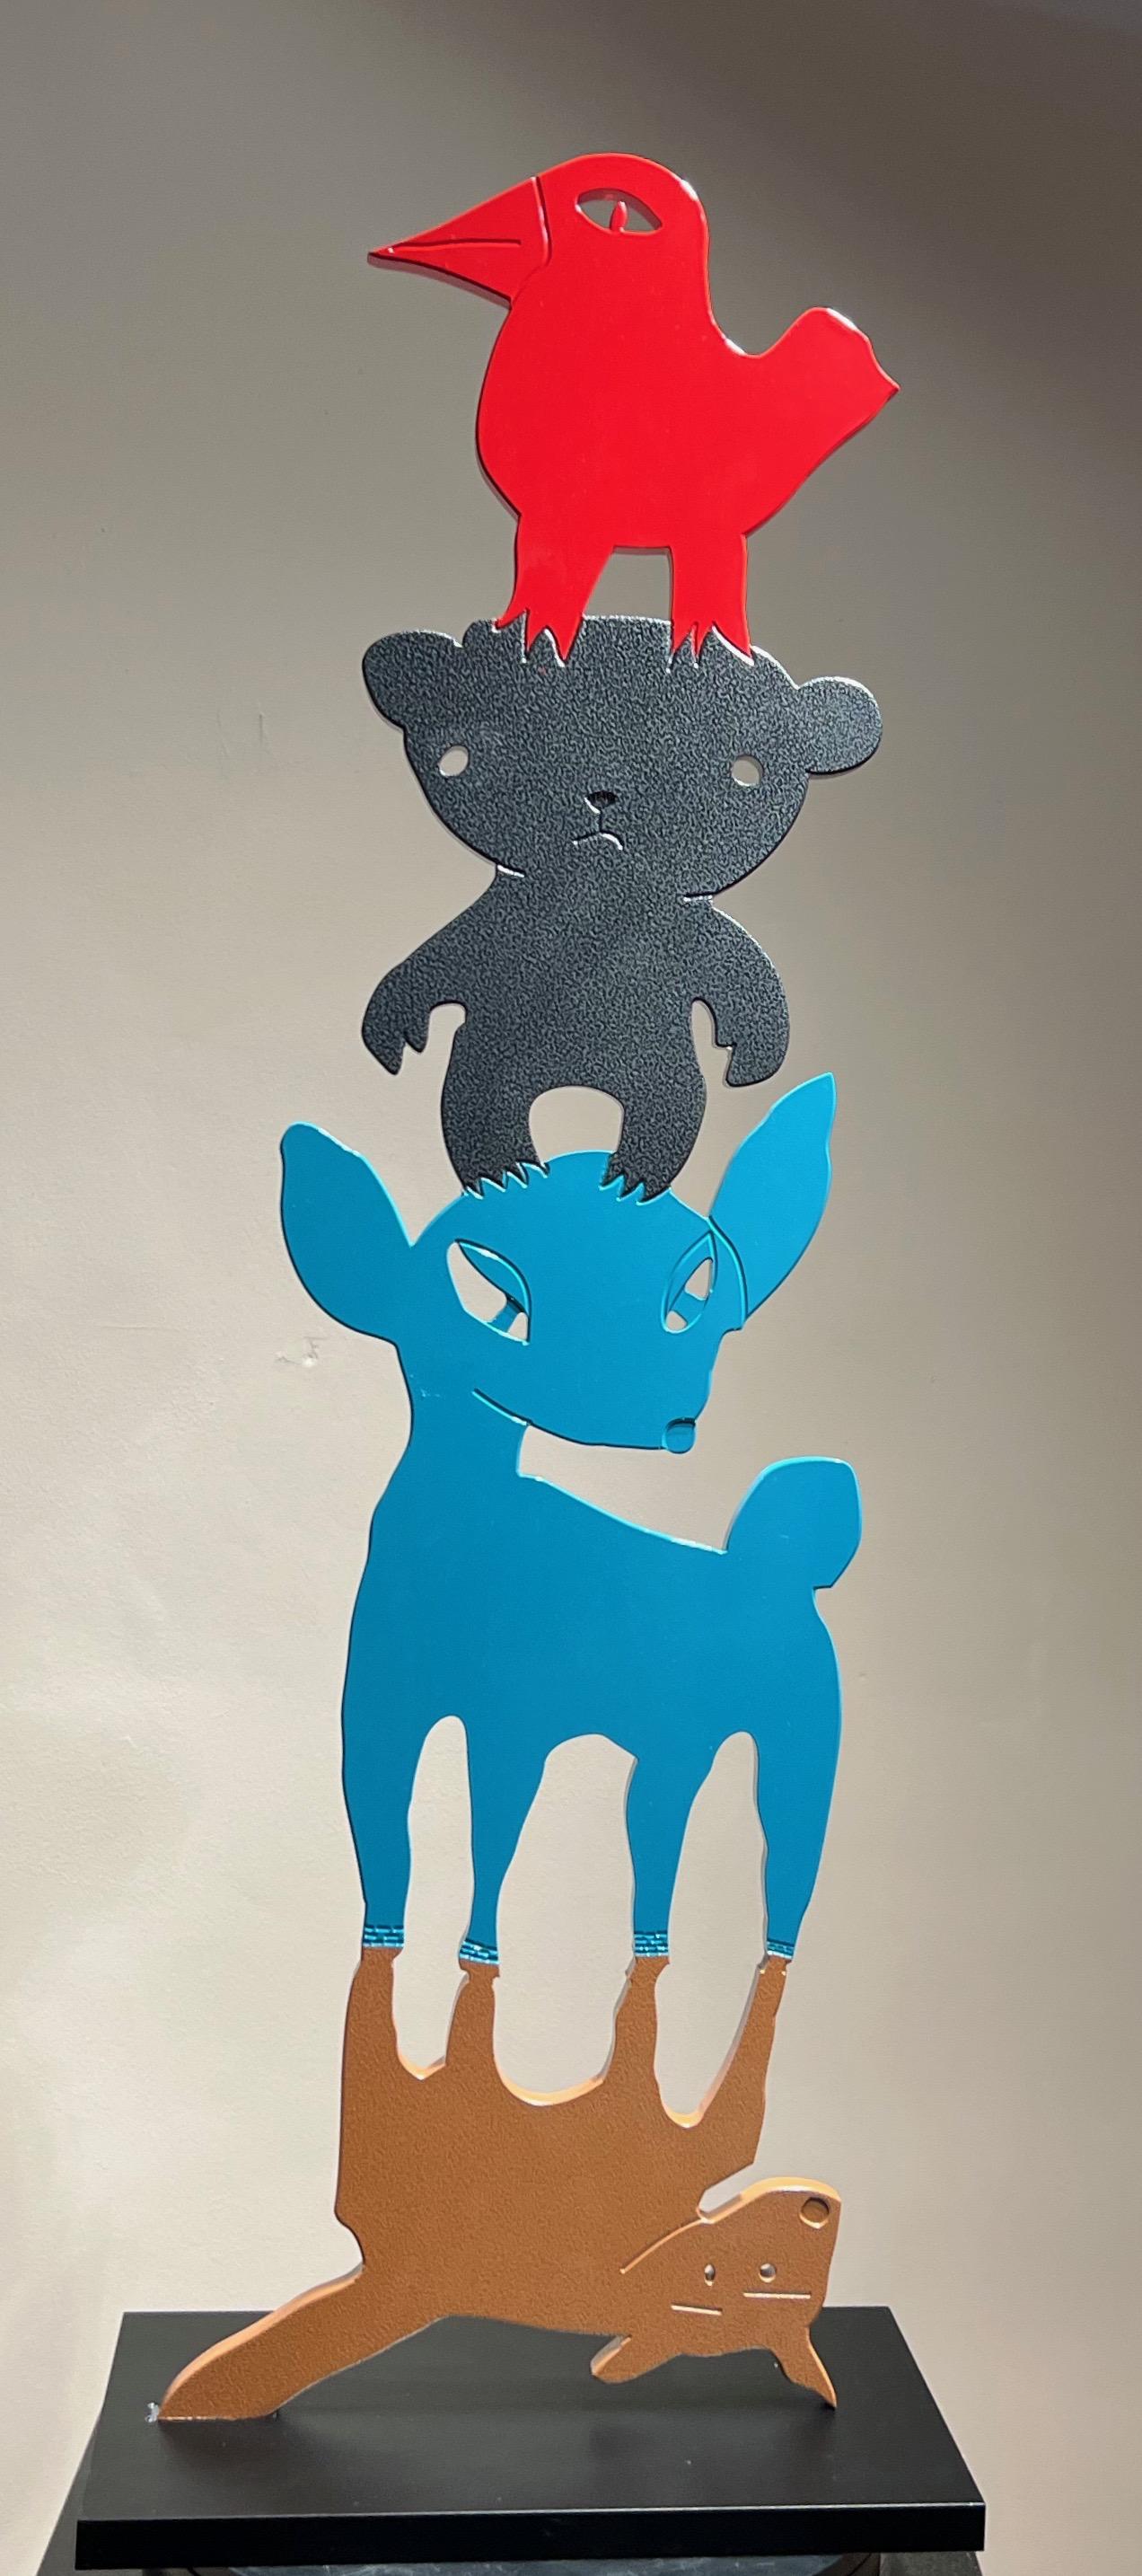 Animal Stack - They Help Each Other, sculpture by Melanie Yazzie multi-color

limited edition sculpture 40
Contact the gallery for completion times and delivery schedule.

As a printmaker, painter, and sculptor, my work draws upon my rich Diné